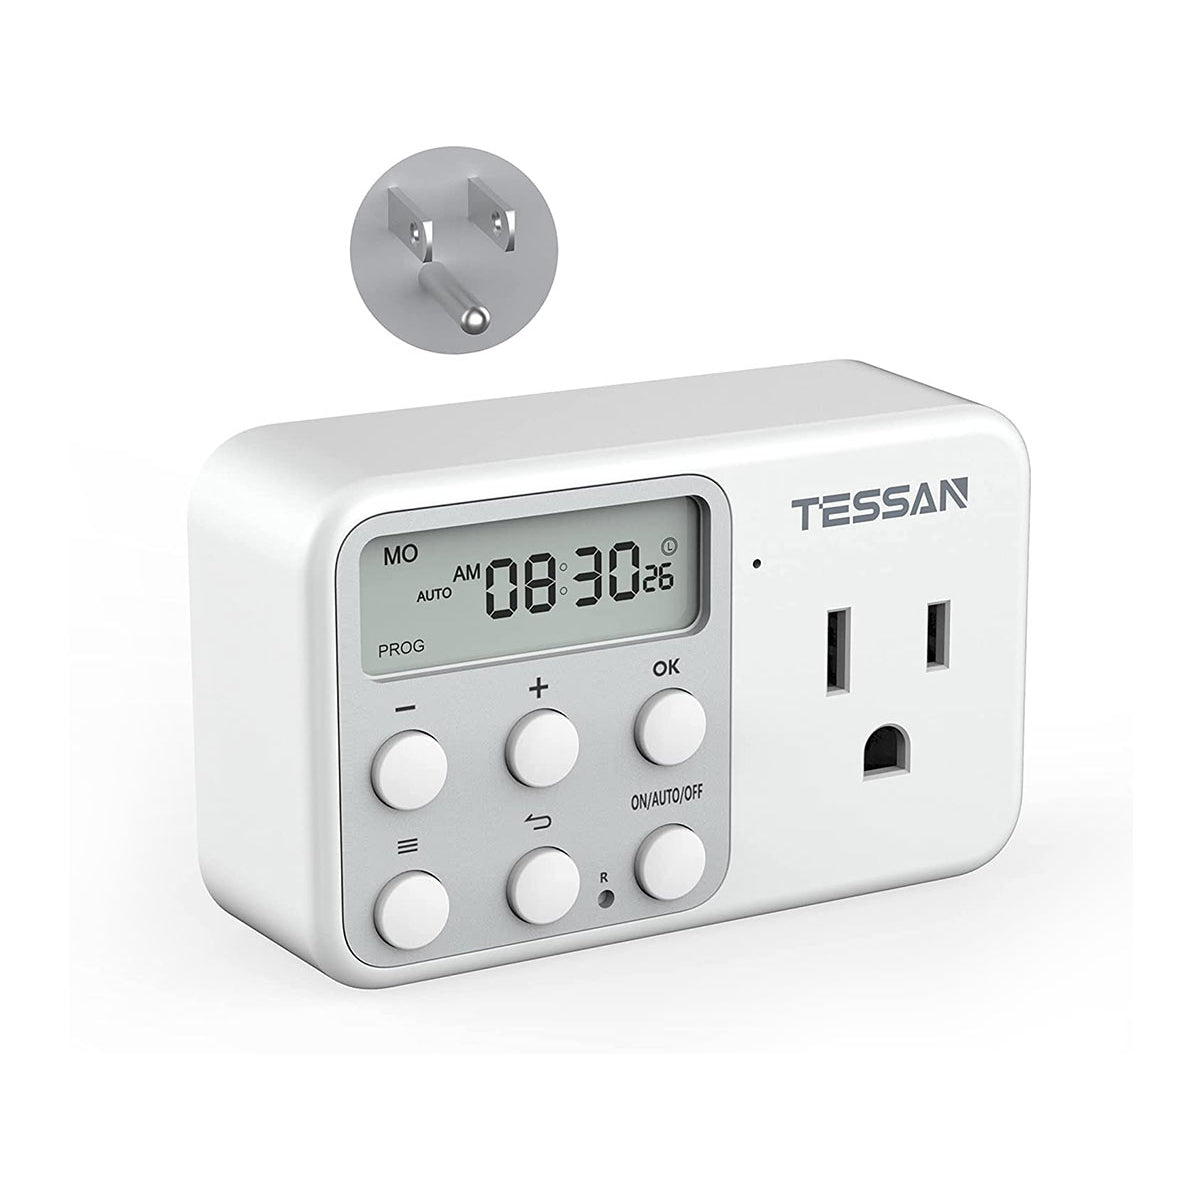 TESSAN Light Timer Plug Support 24 Hour and 7 Day Programmable